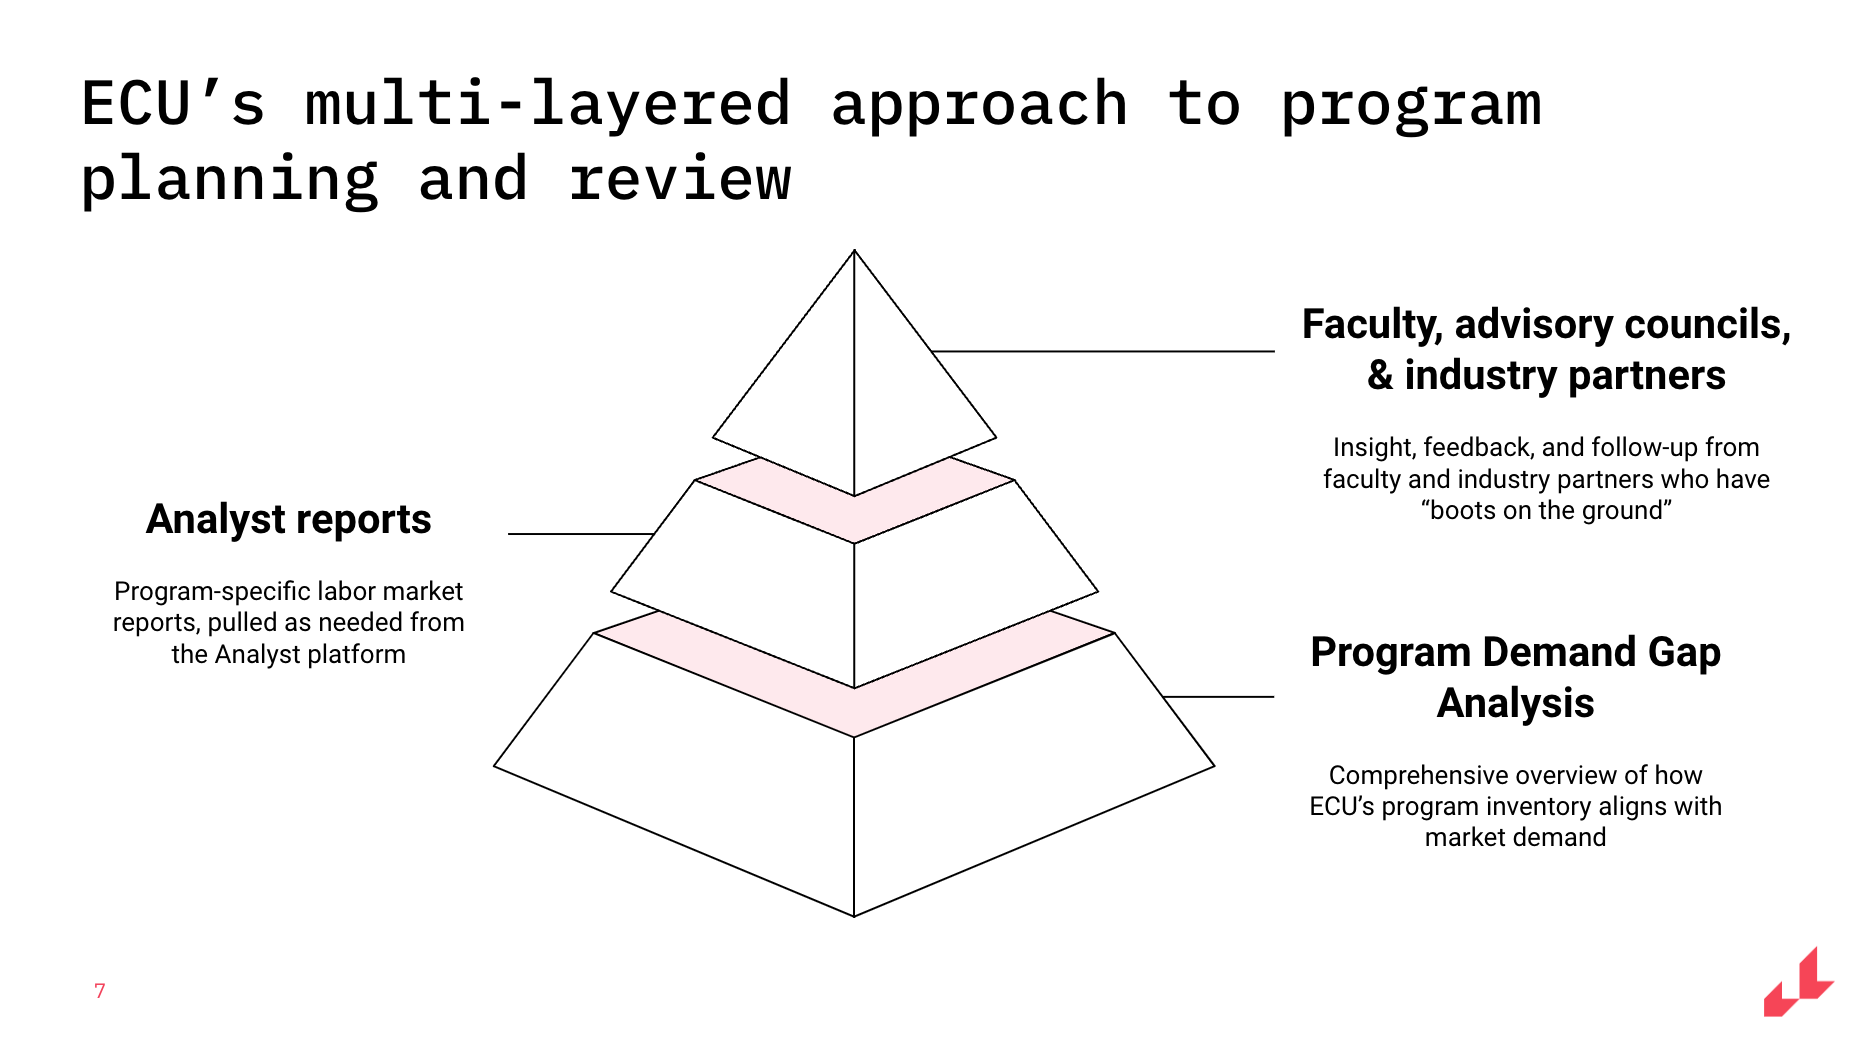 Pyramid showing the different phases of ECU's approach to program planning and review.